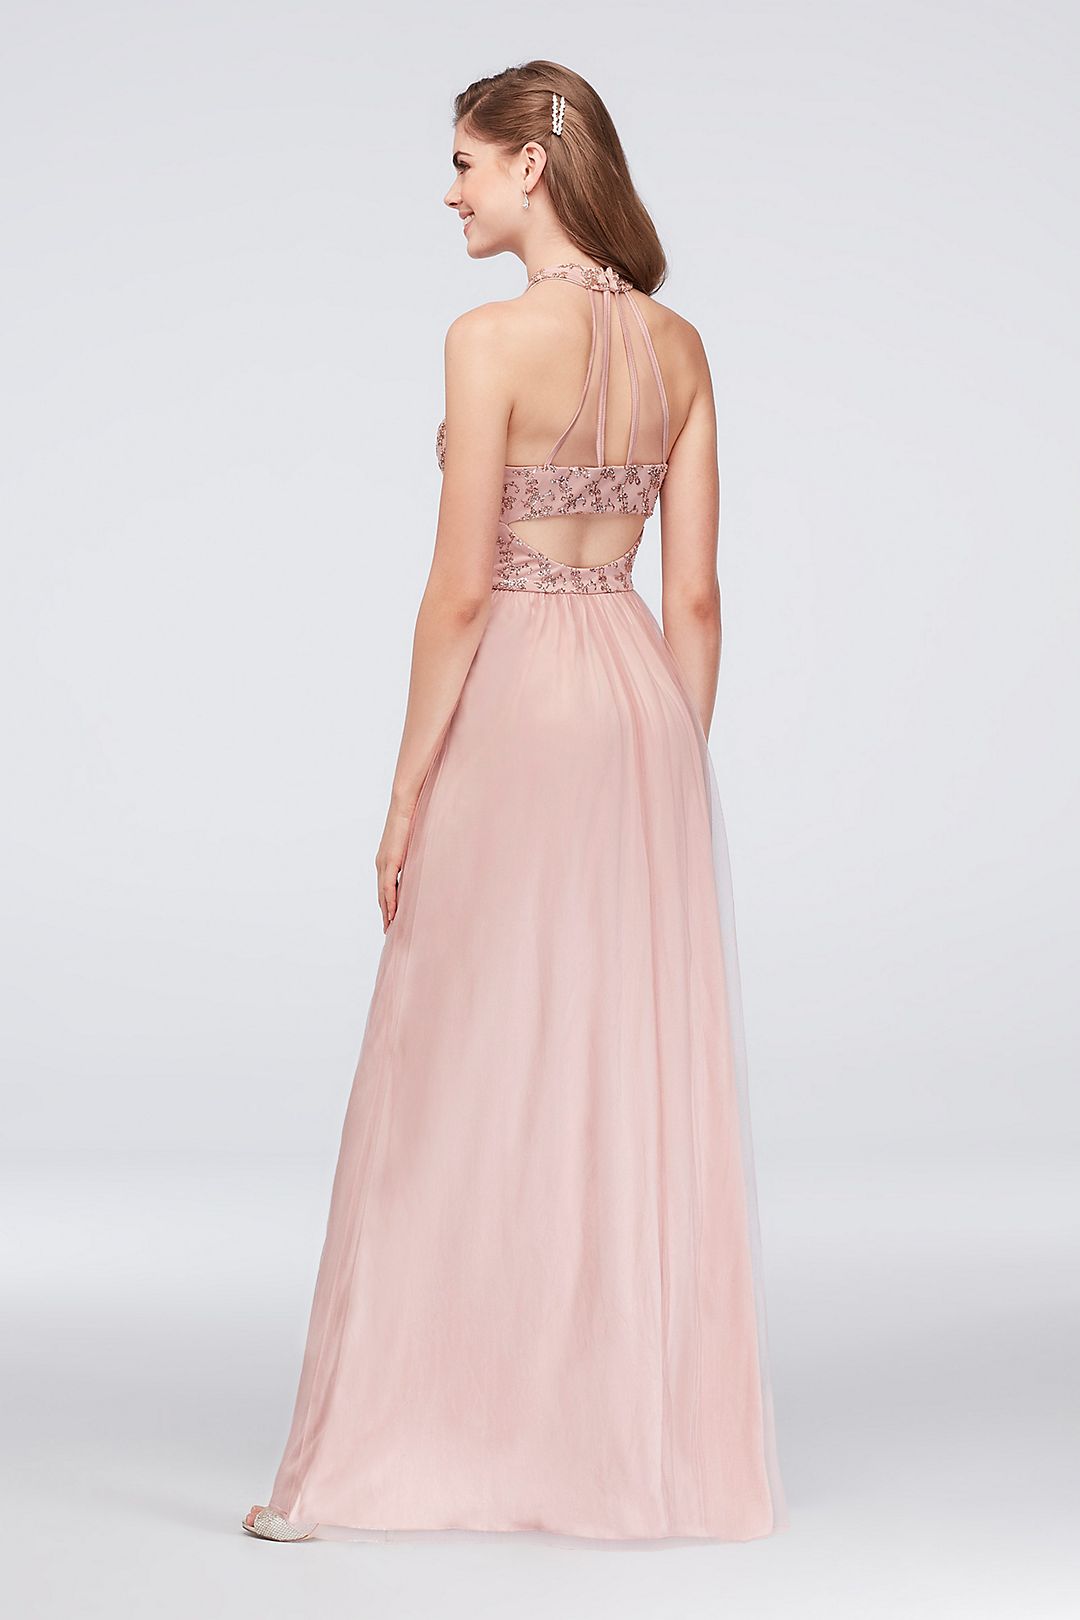 Sequin Chiffon Keyhole Bodice High-Neck Gown  Image 2